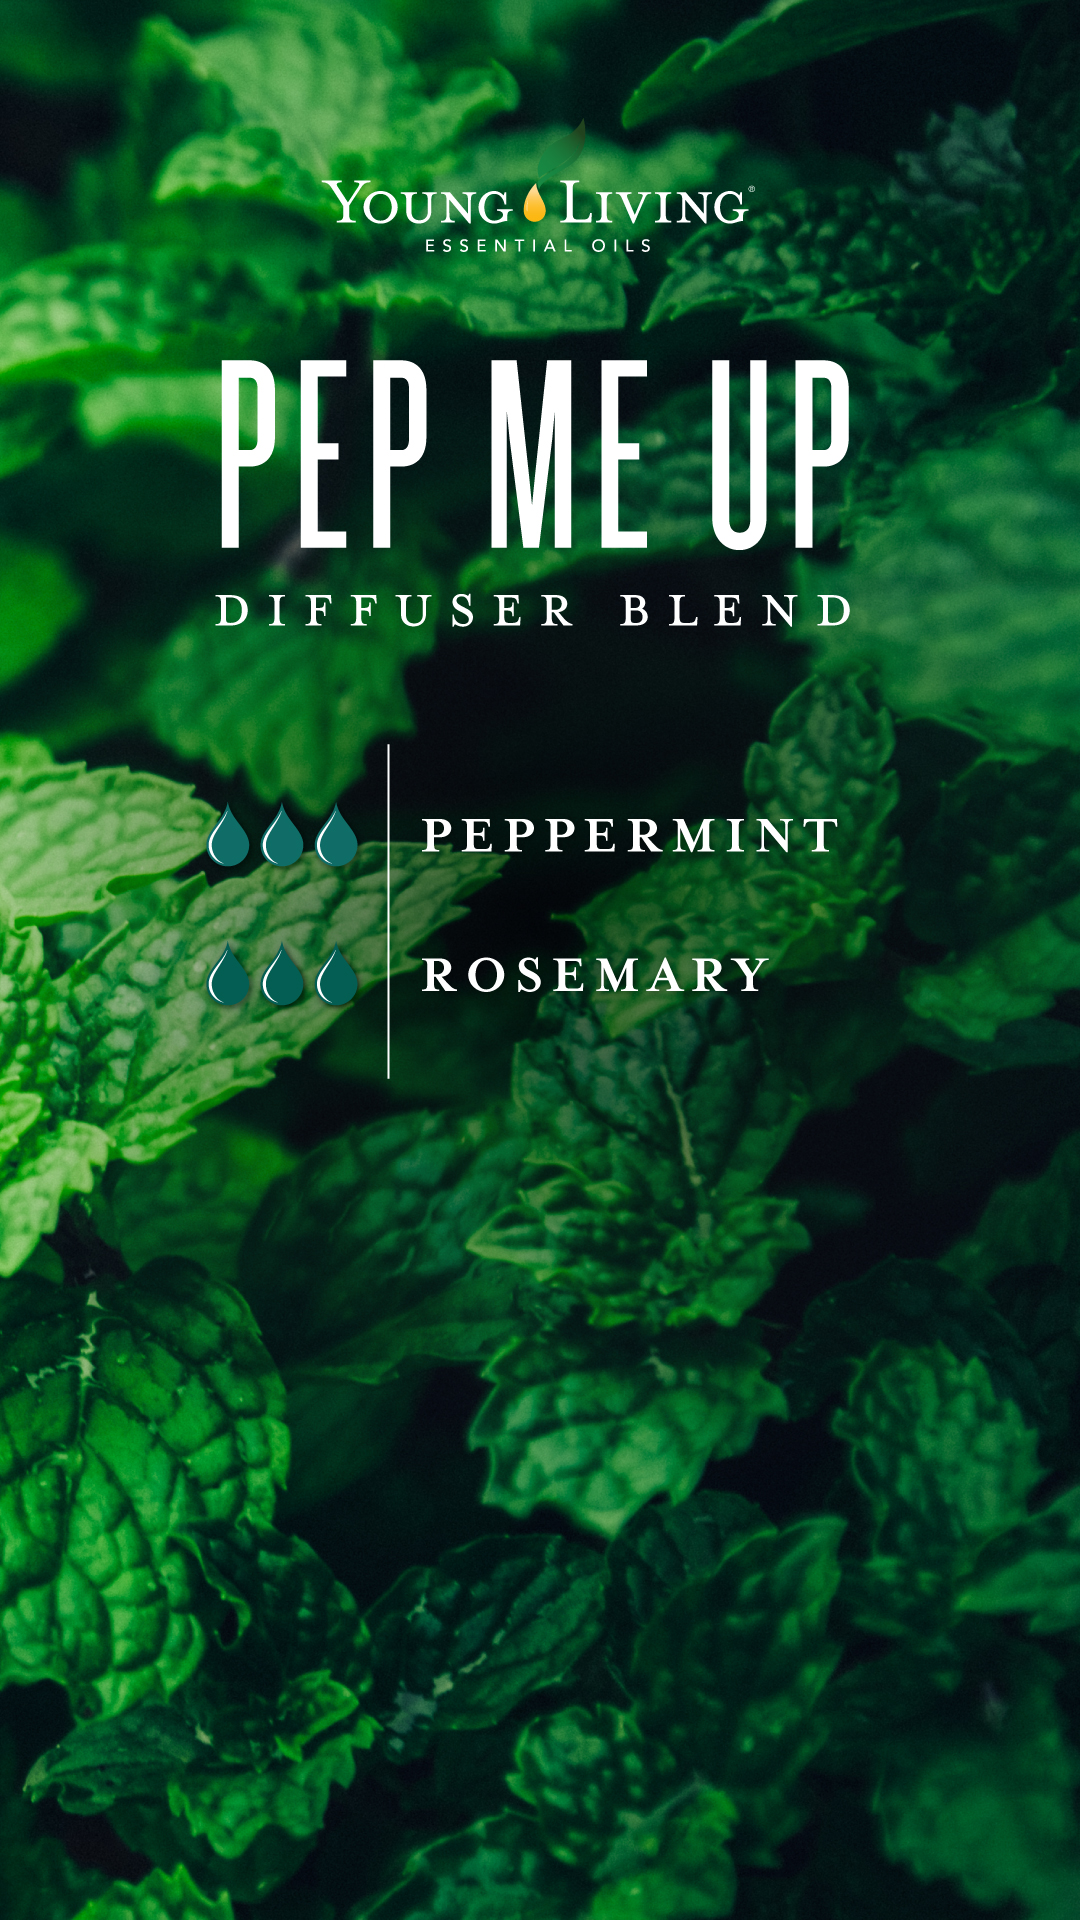 Pep Me Up Diffuser blend recipe by young living essential oils